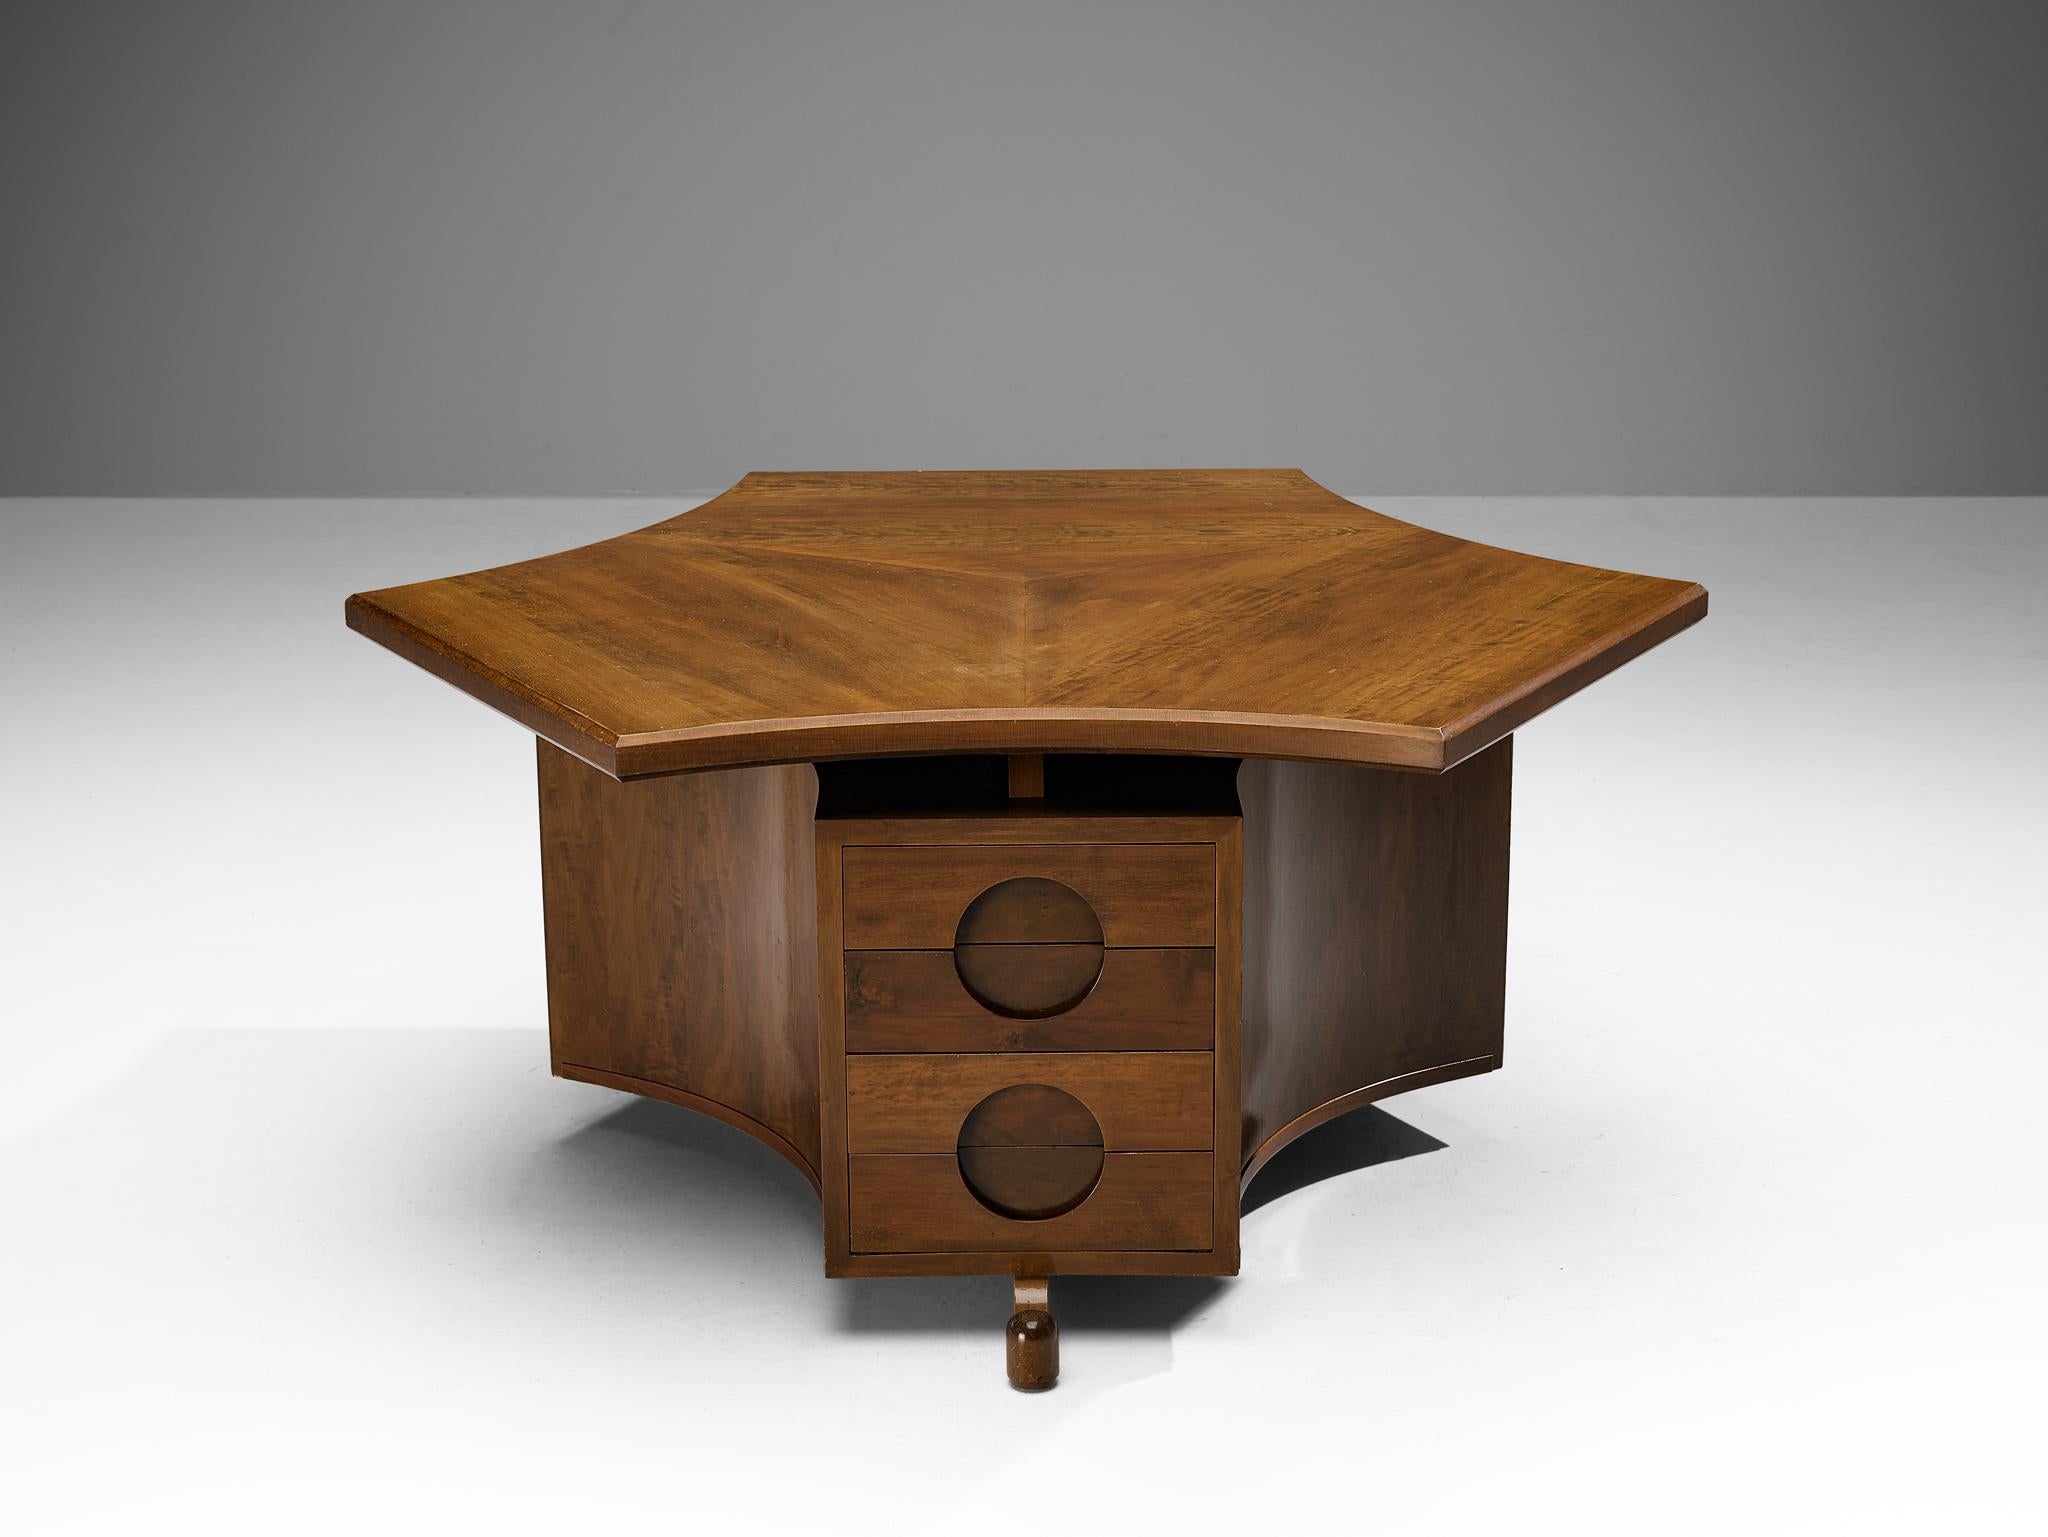 Freestanding desk, walnut, wood, France, 1940s

This hexagon shaped desk is made in France in the 1940s. The shapes used in the design of this desk make it special and rare to find. There is room for three separate work stations within this desks